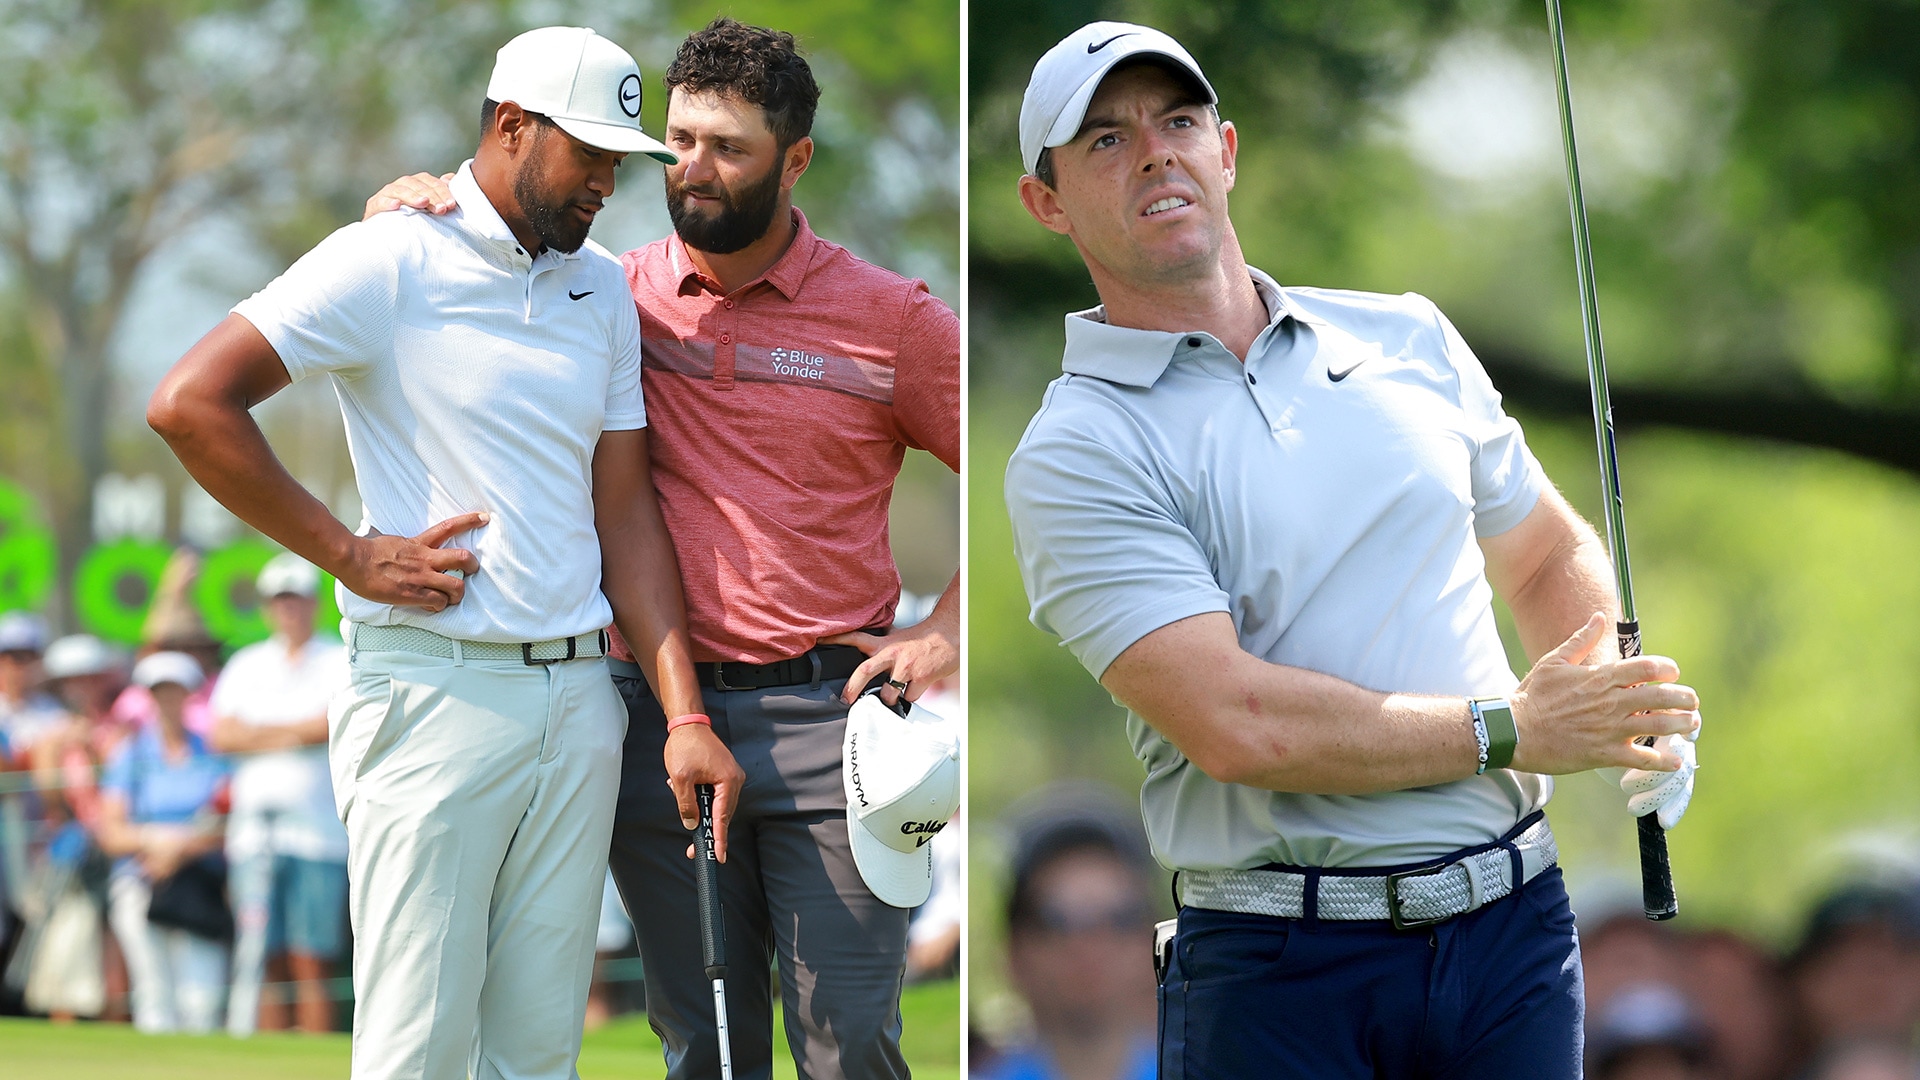 Monday Scramble: All eyes on Finau, Rahm in Mexico; all ears on McIlroy in Charlotte